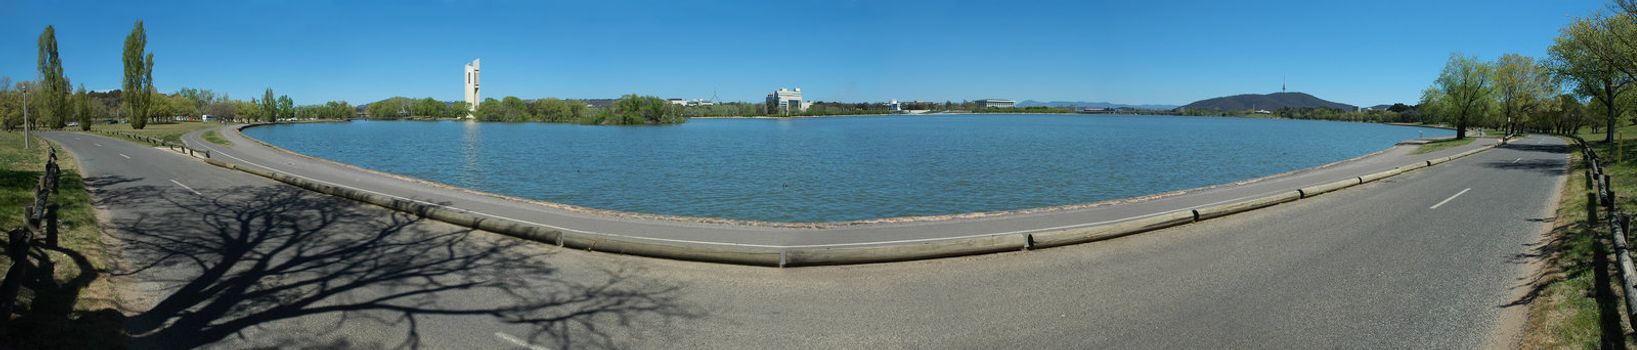 panorama photo of Lake Burley Griffin with National Carillon on Aspen Island in Canberra, Australia